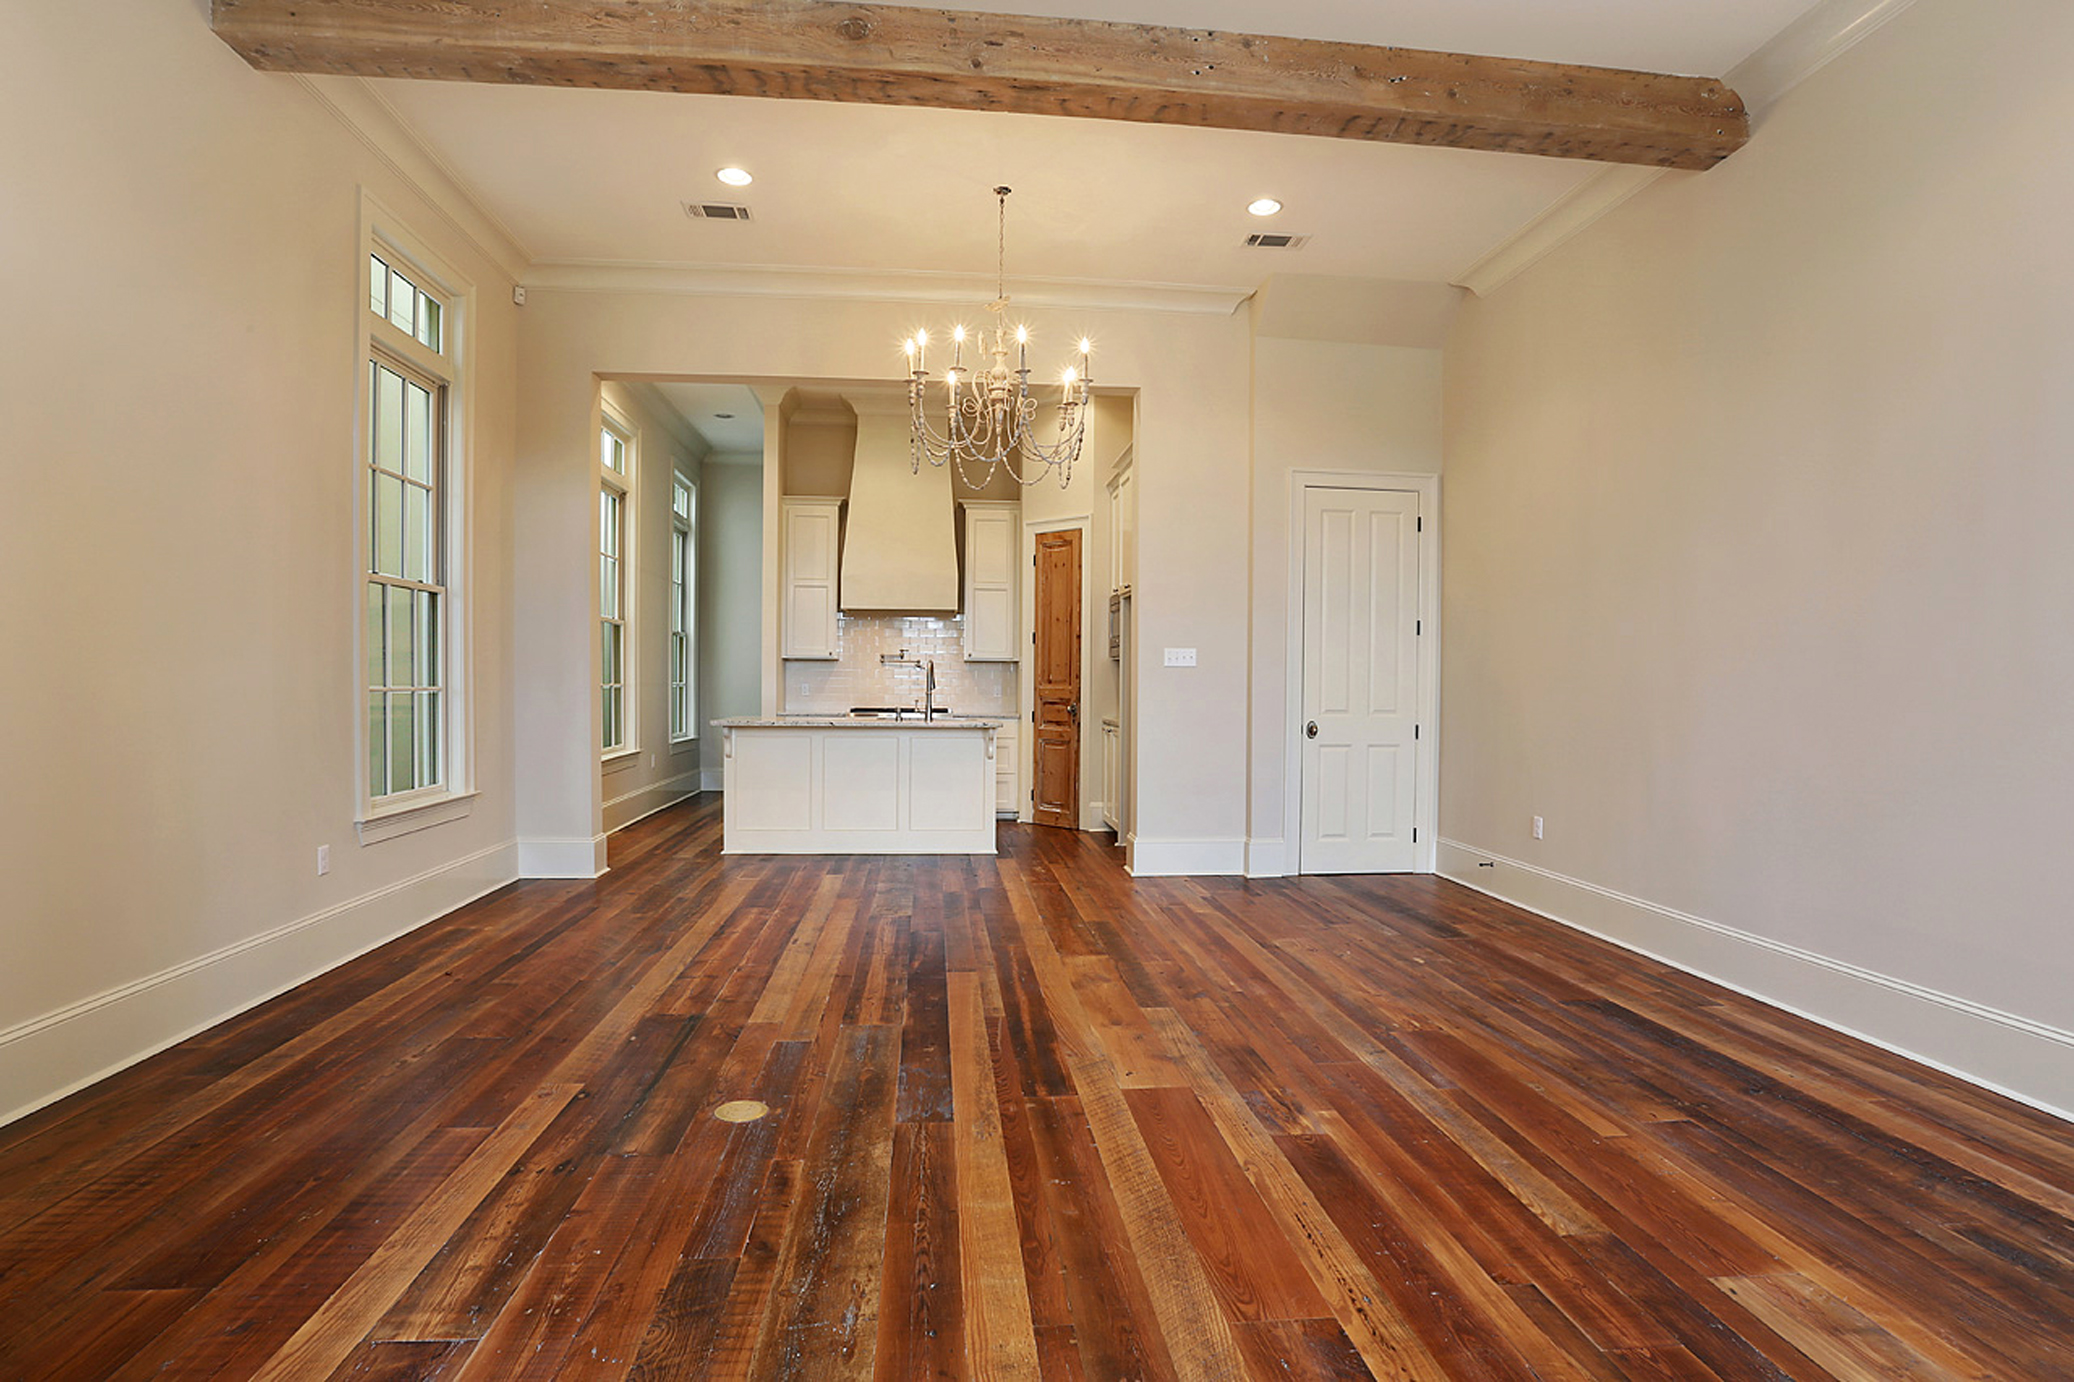 For this home in the Perkins Lane development, Holliday let features like old beams and heart-pine floors shine by keeping her palette toned down but textural.